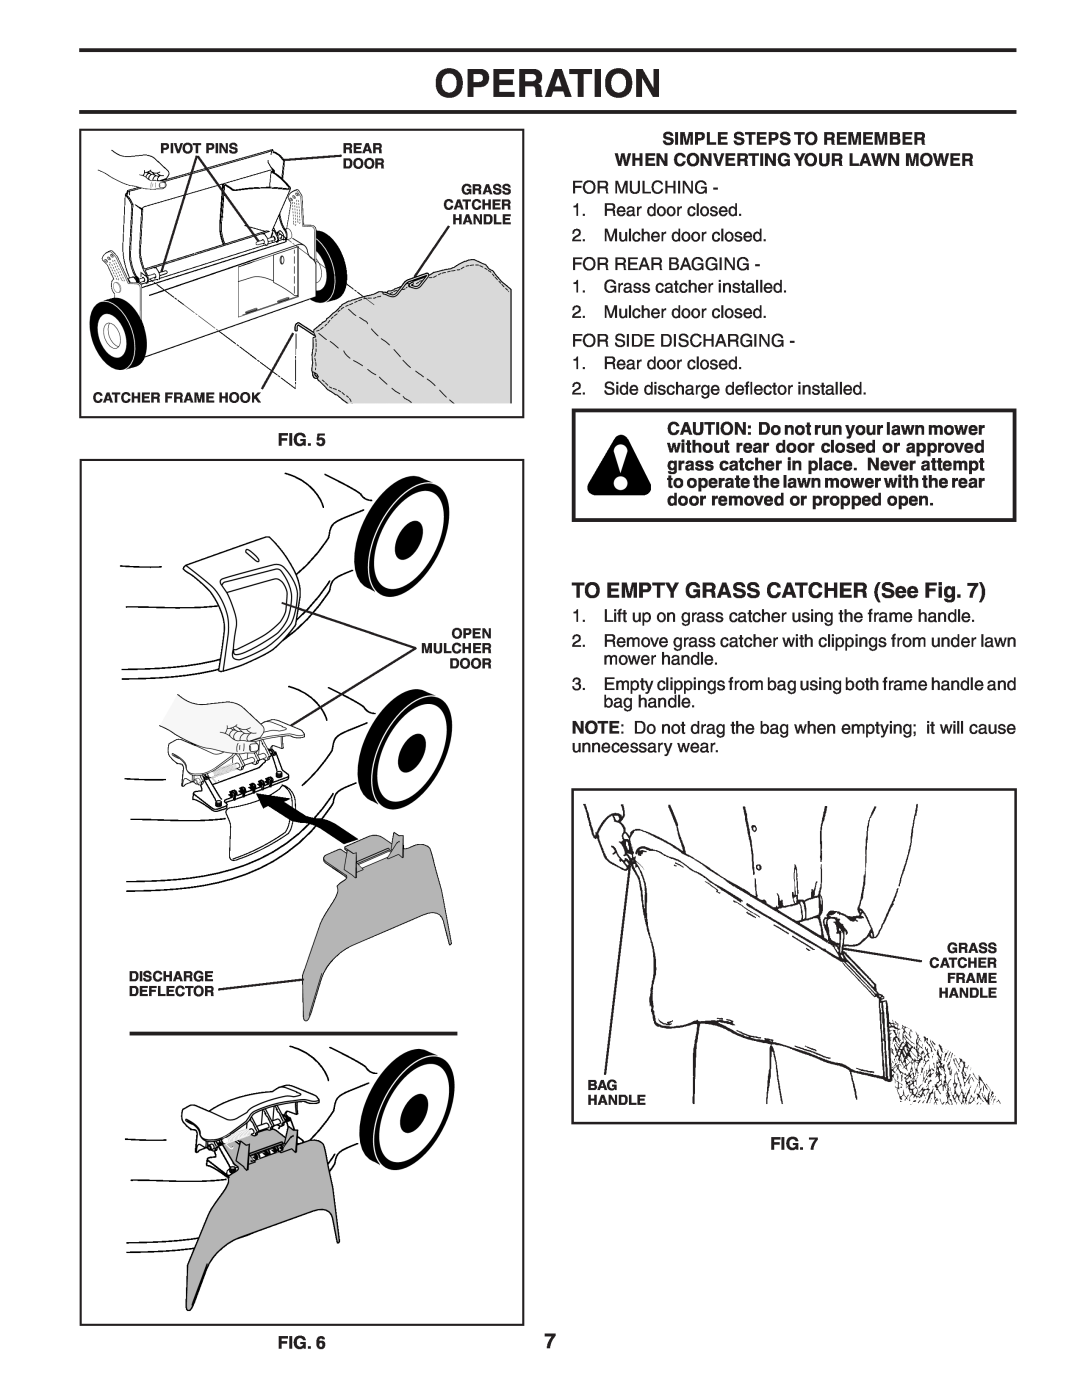 Husqvarna 5521CH TO EMPTY GRASS CATCHER See Fig, Simple Steps To Remember When Converting Your Lawn Mower, Operation 